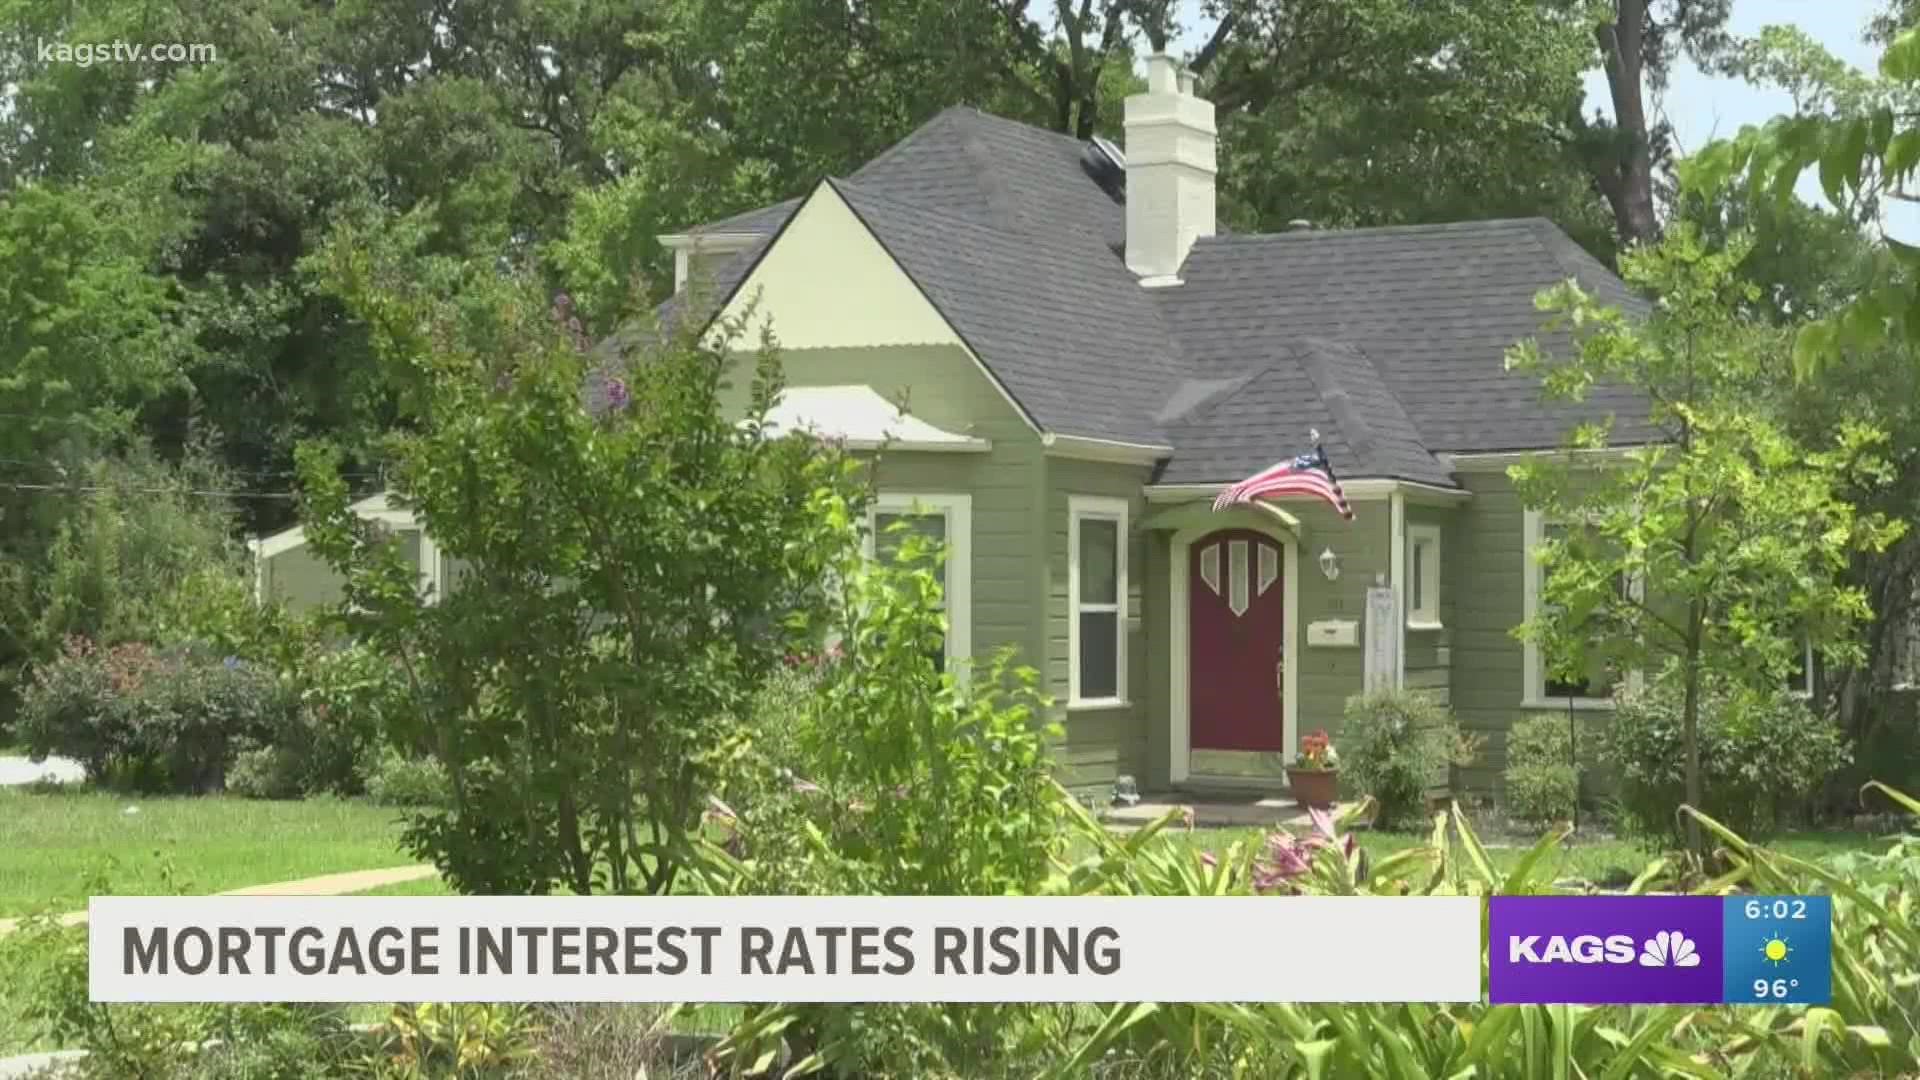 Brazos residents are seeing a huge increase in mortgage interest rates.